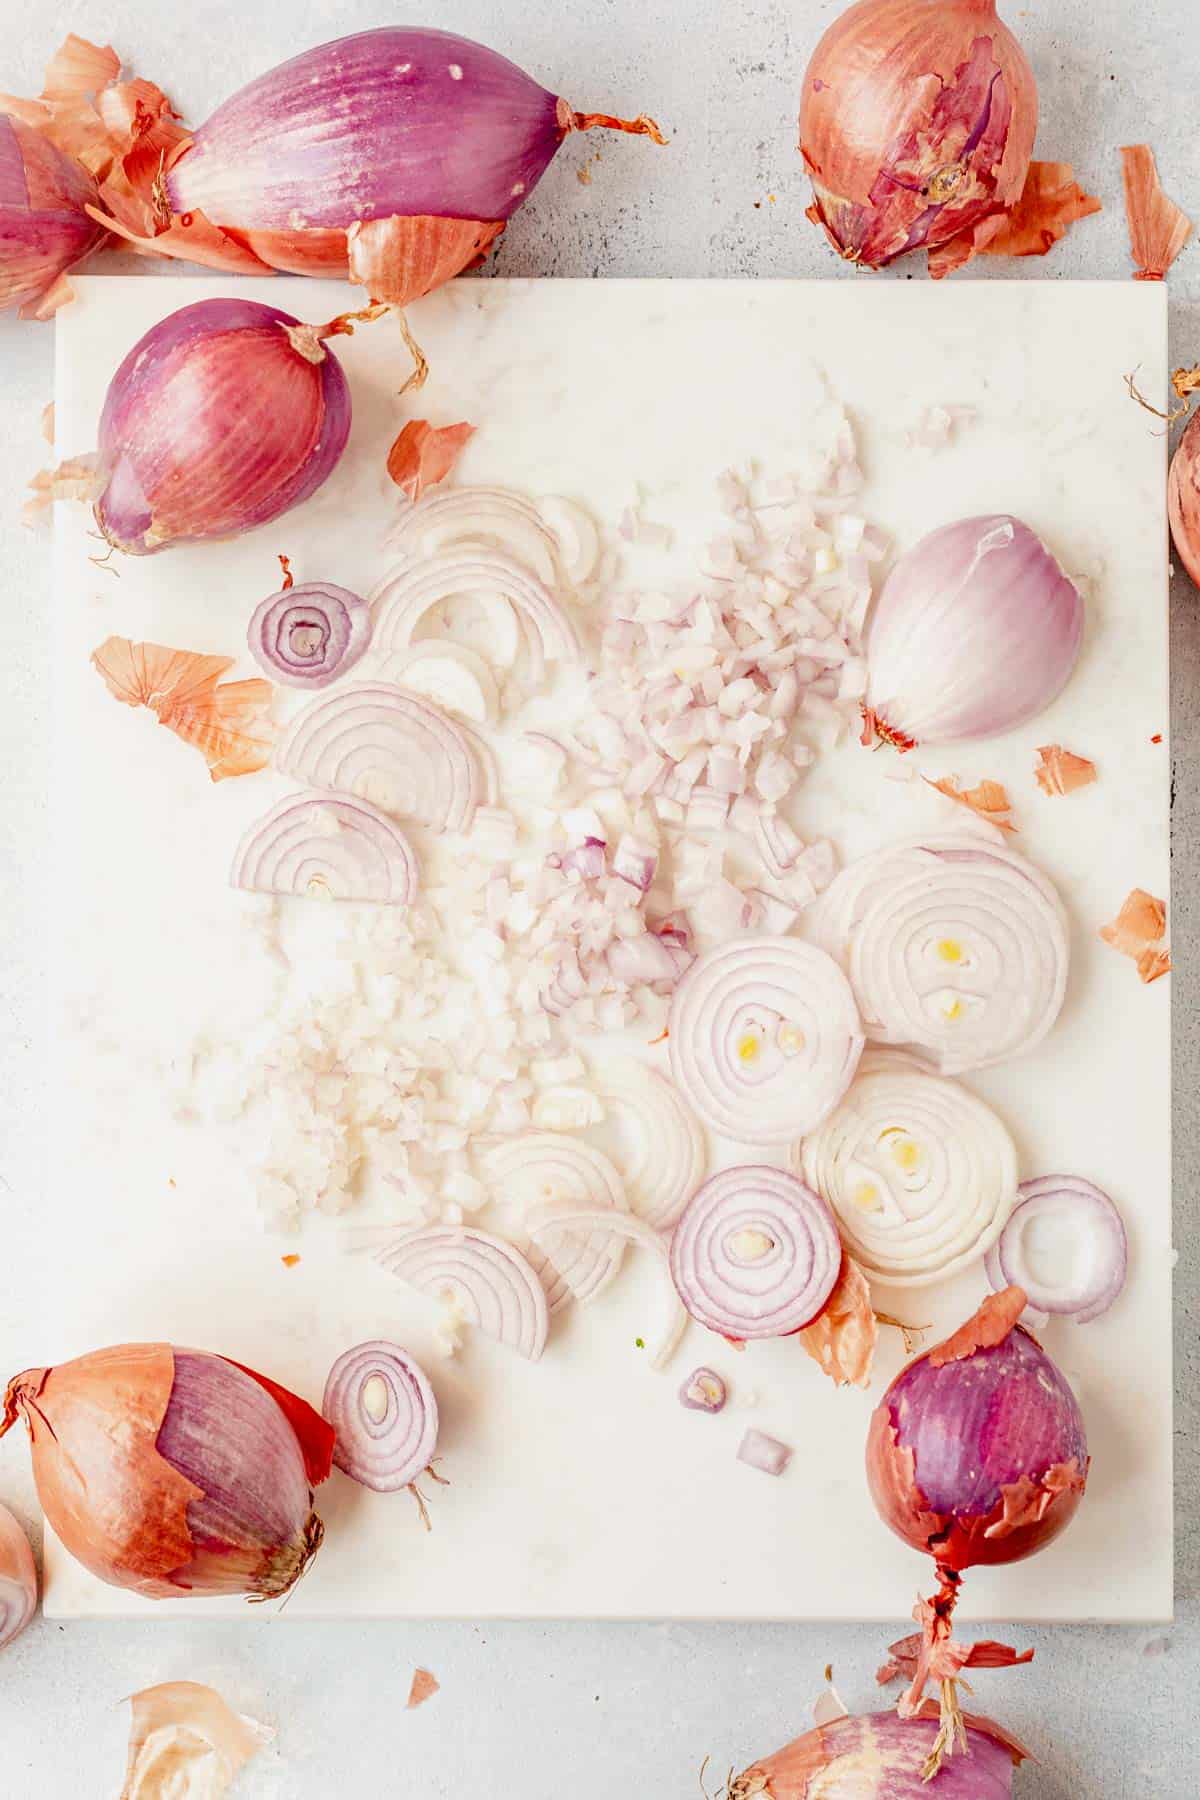 whole shallots, diced shallots, and sliced shallots on a cutting board